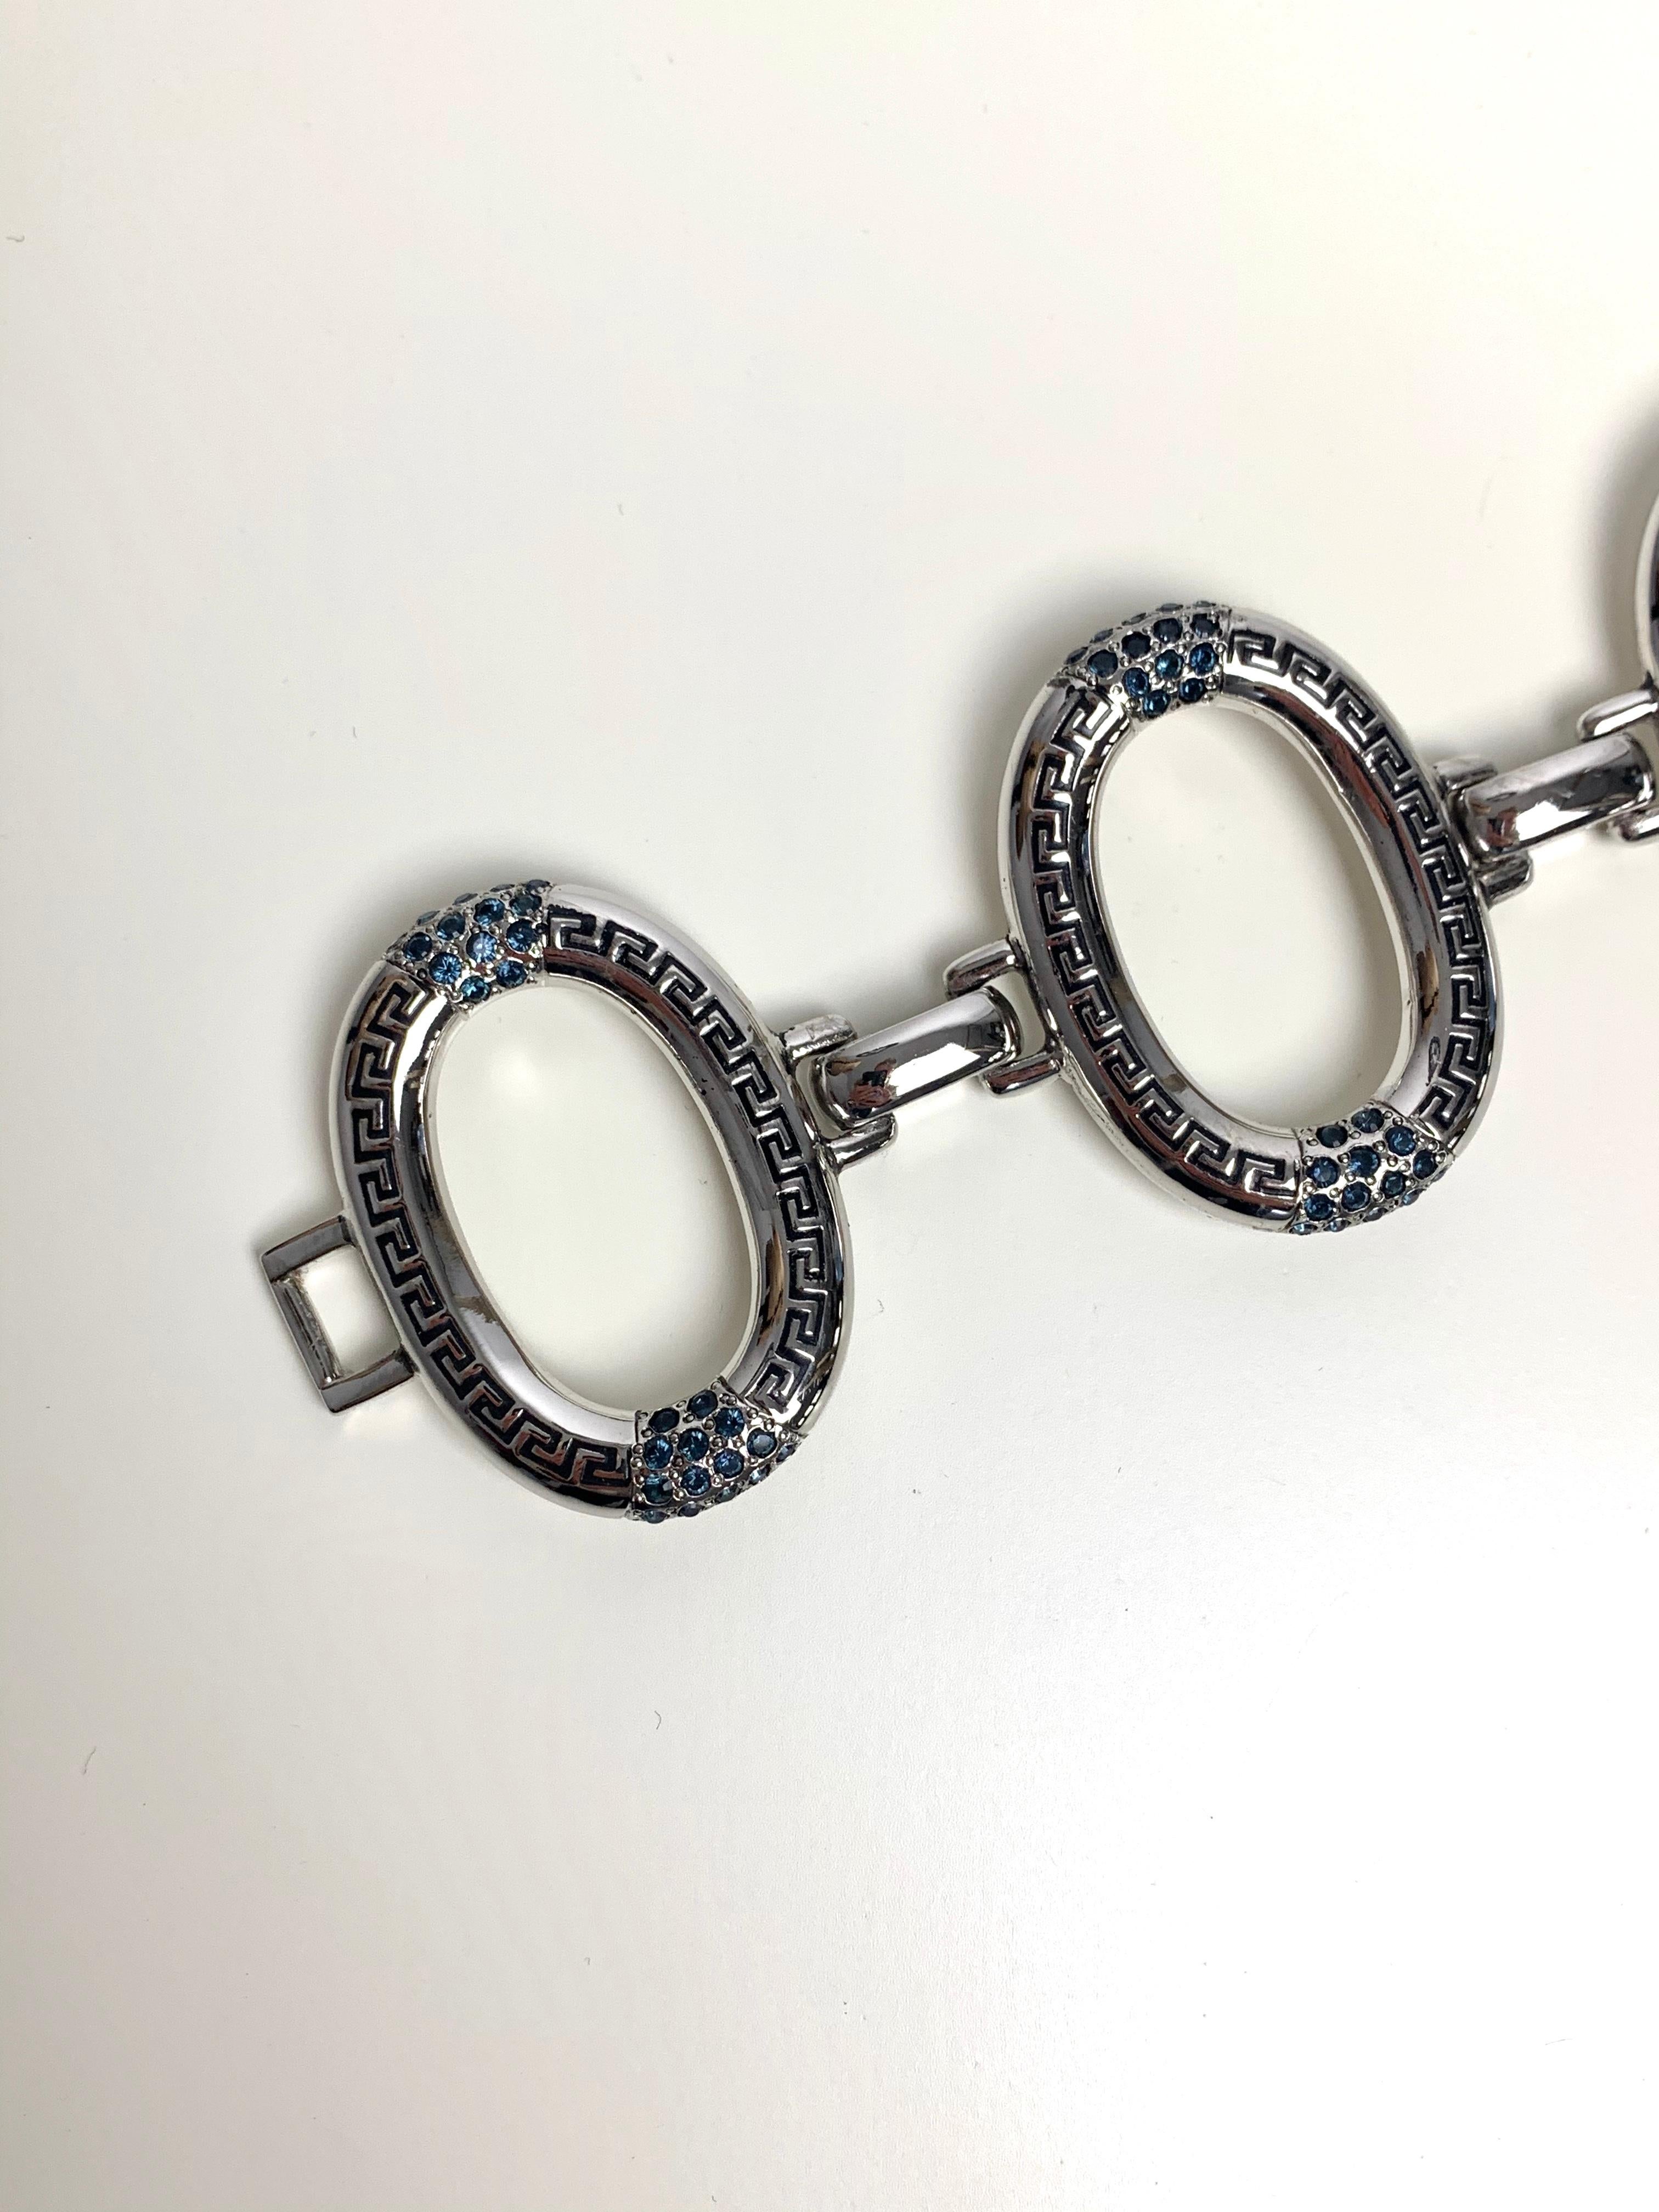 This Gianni Versace oval bracelet features large over shaped links with the Greek tile motif engraved in each link. They also have dark blue stones at the top and bottom which contrasts beautifully against the silver bracelet. This is a simple